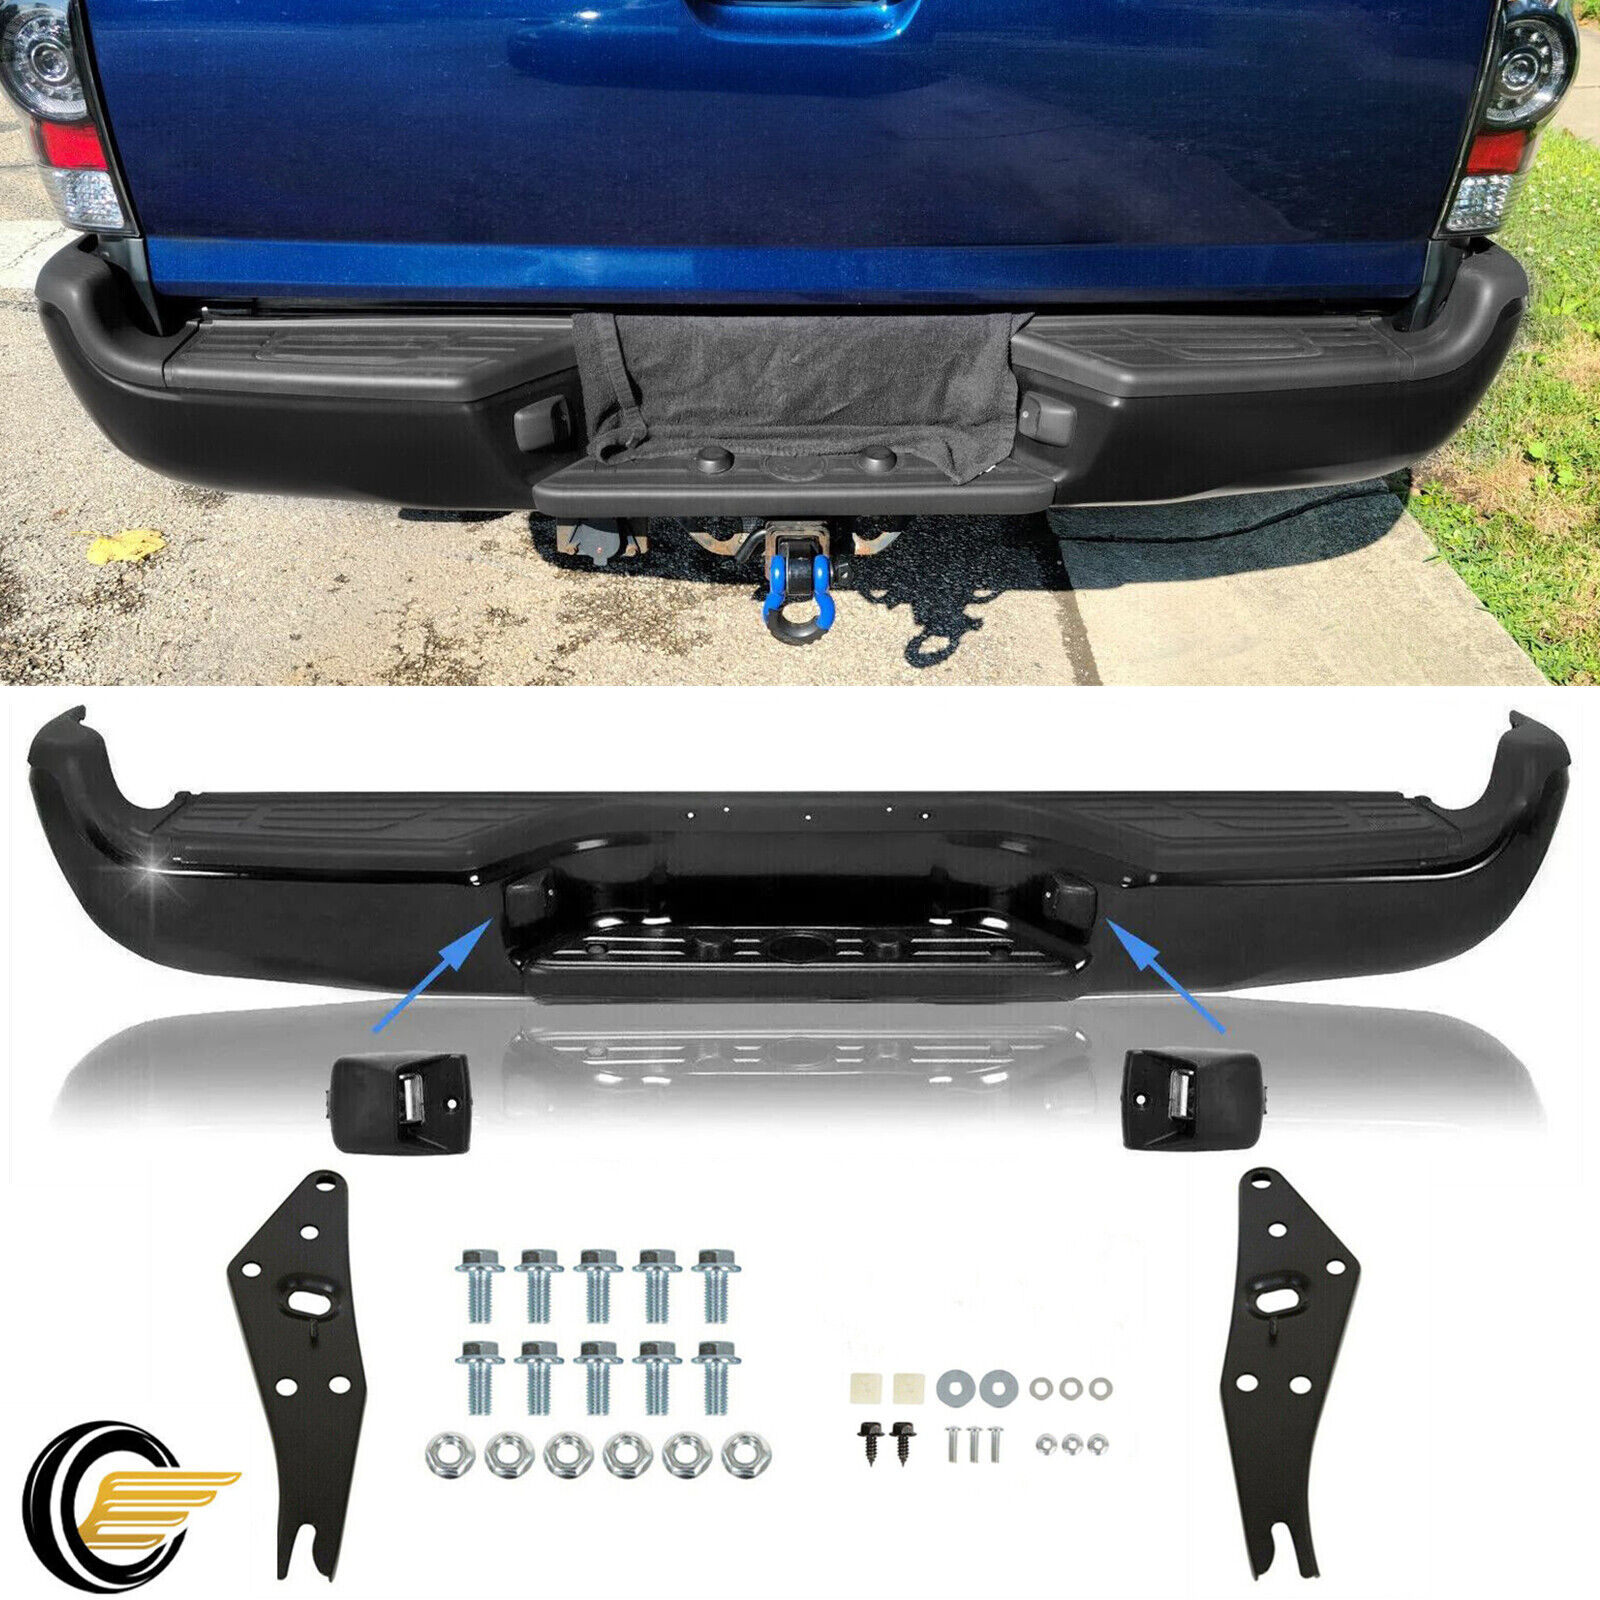 NEW Steel -Complete Black Rear Step Bumper Assembly For 2005-2015 Tacoma Pickup